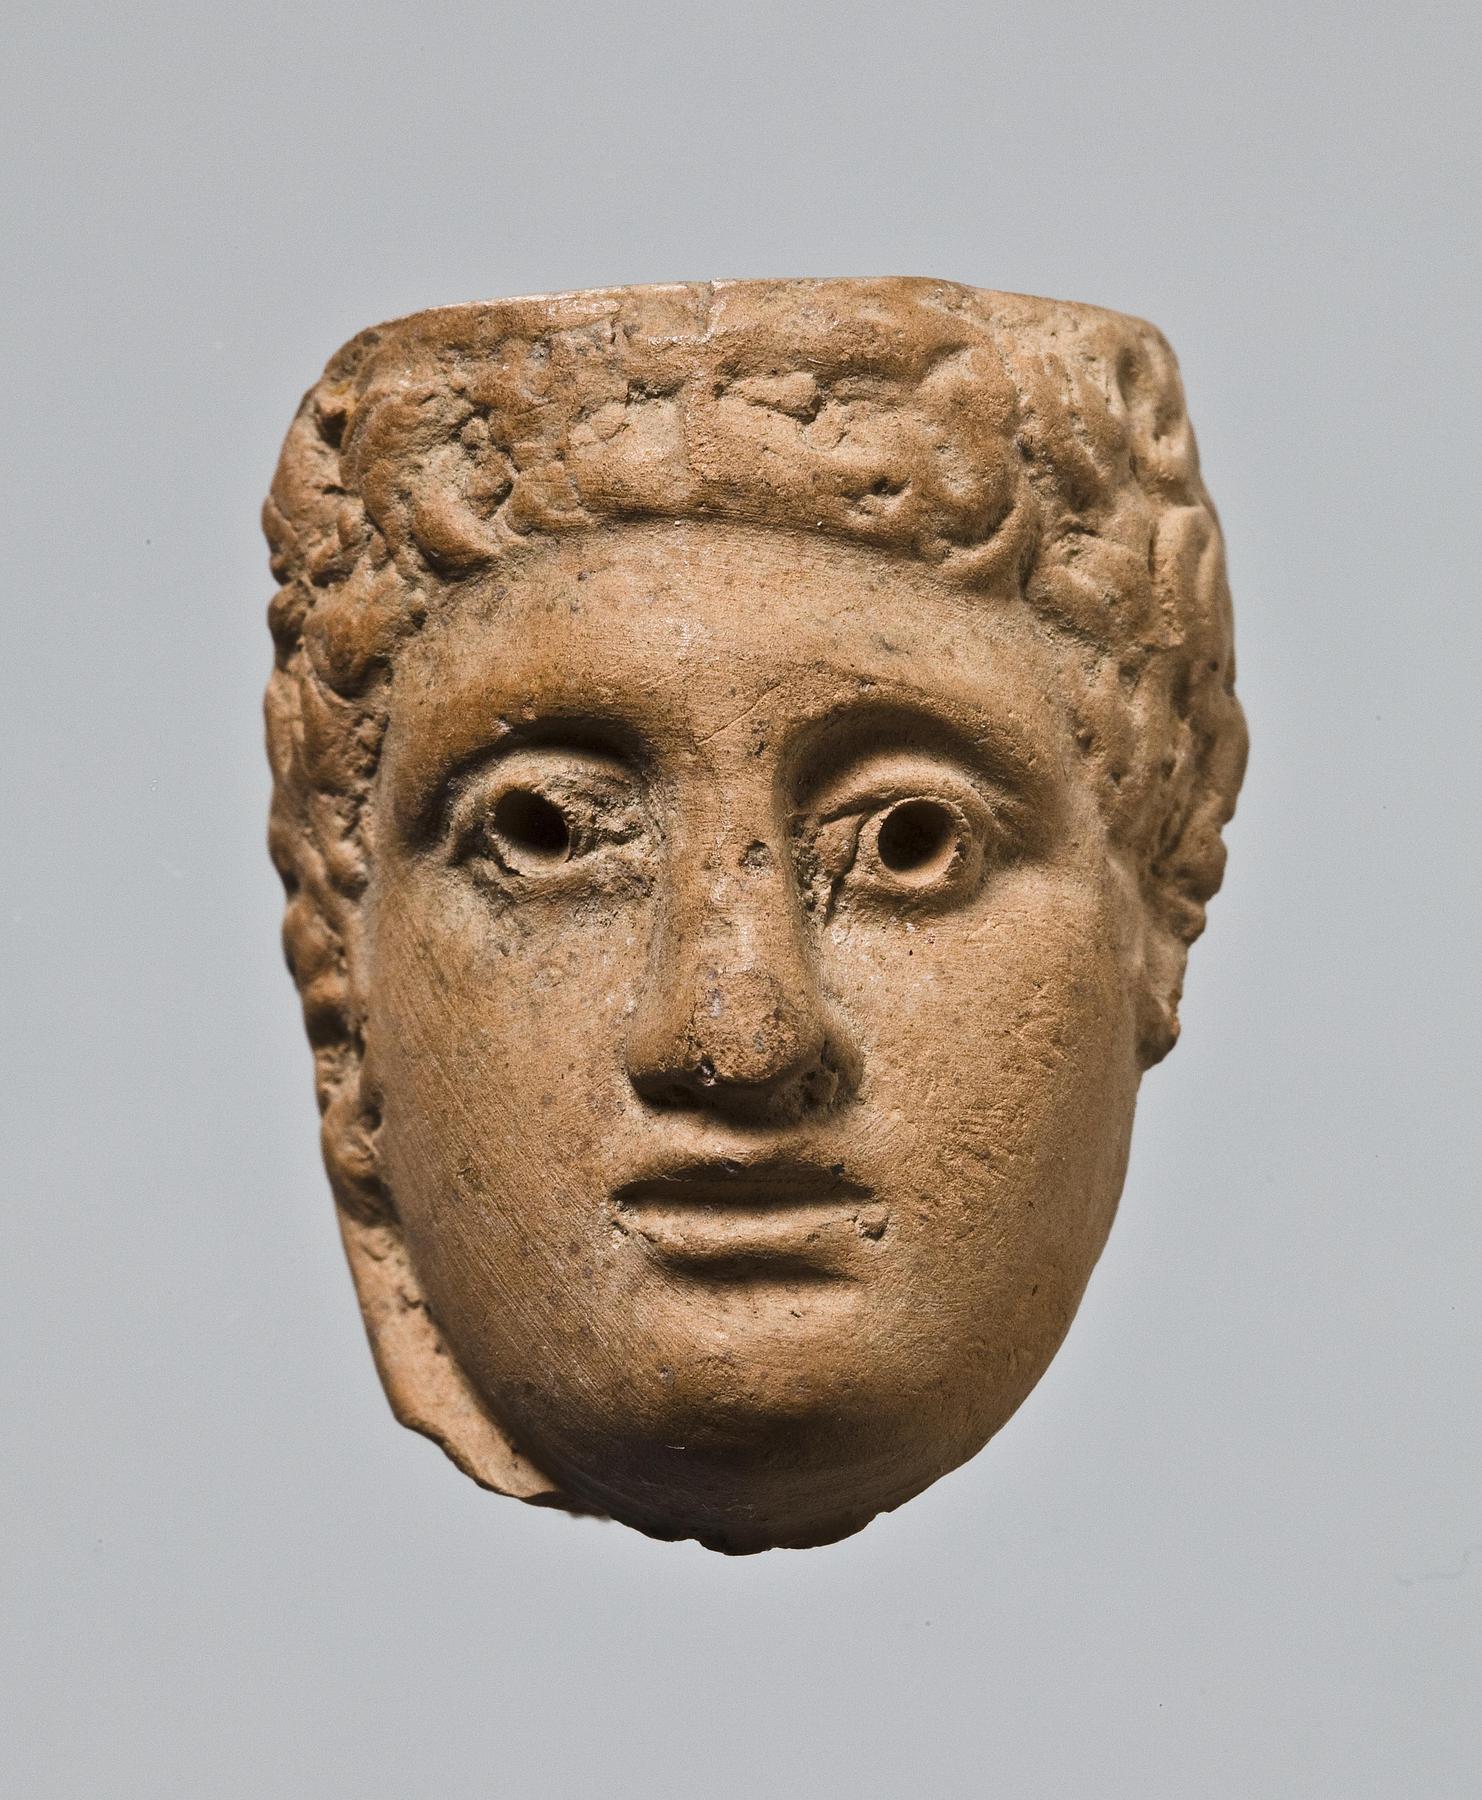 Appliqué (?) in the shape of a male head, H1035